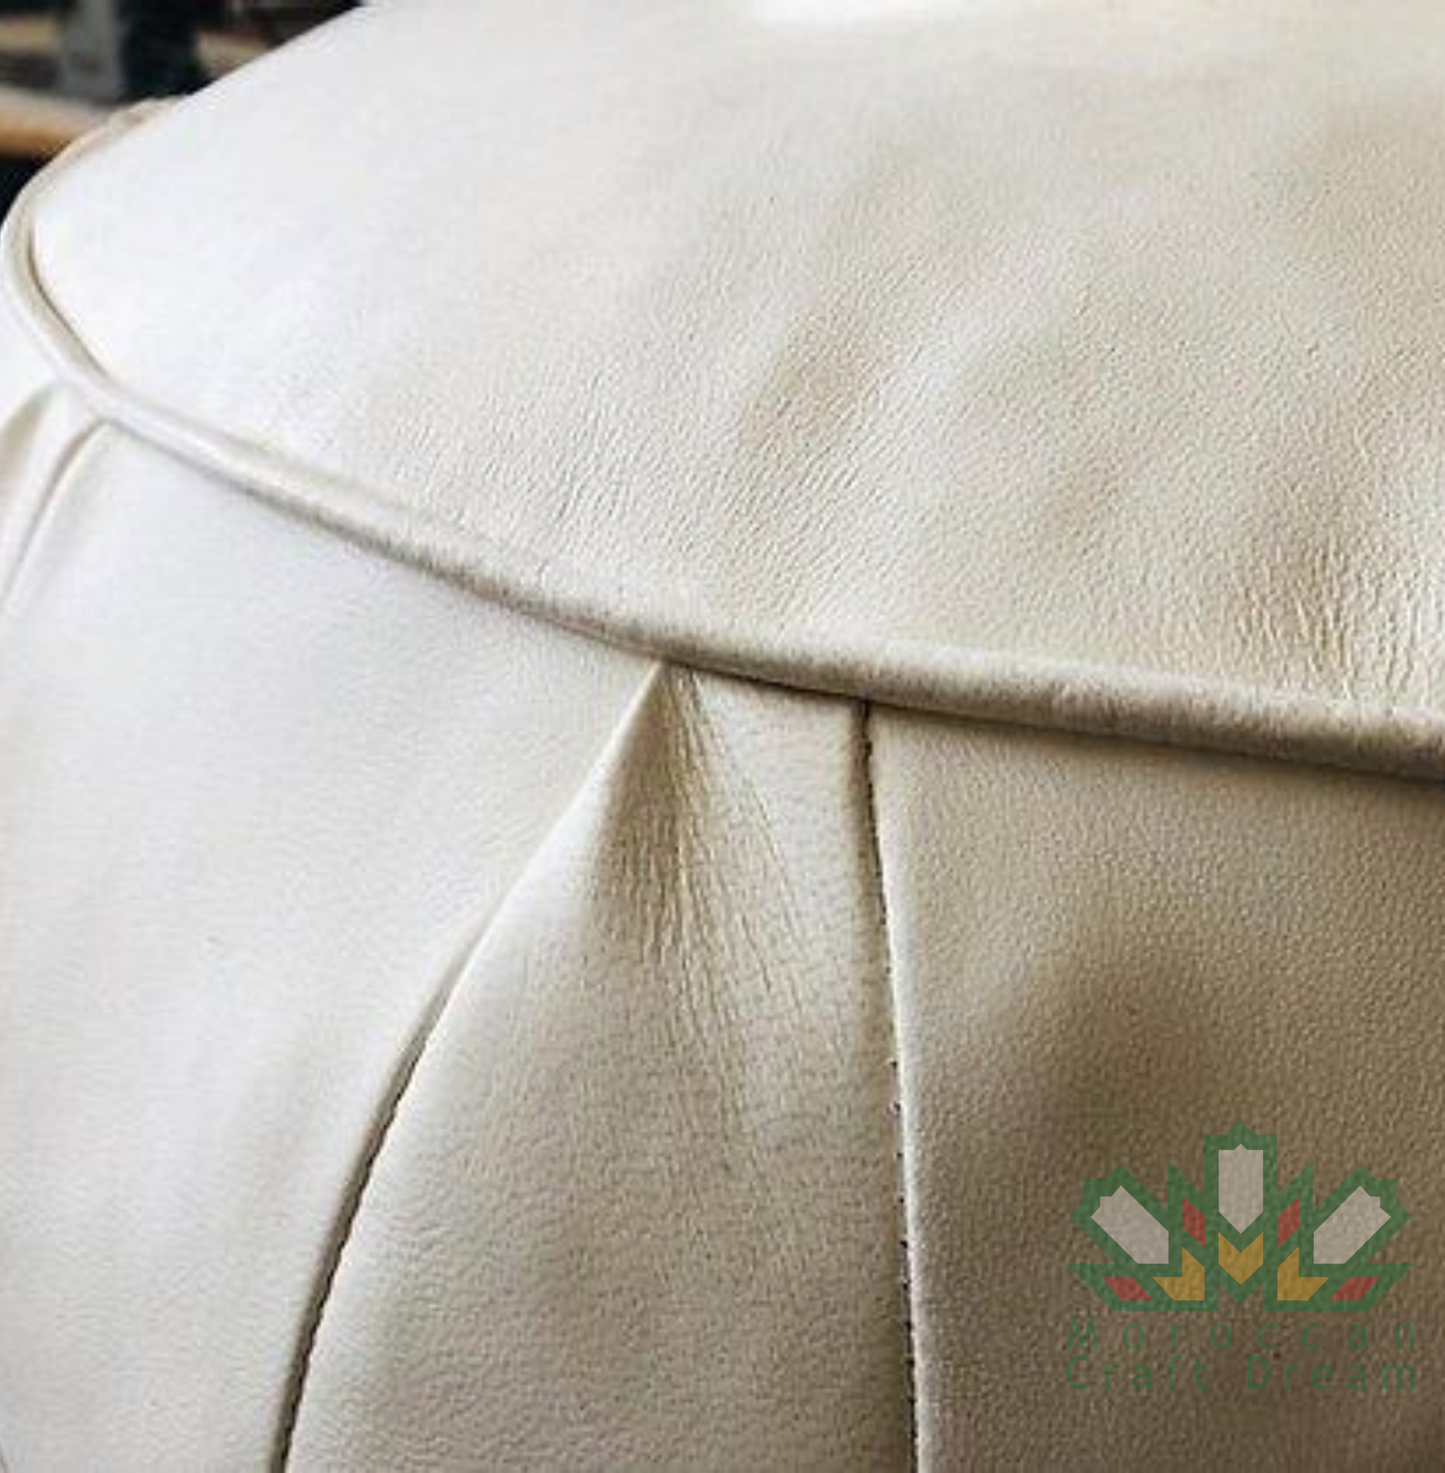 CLASSY LEATHER OTTOMAN WHITE CP3WH